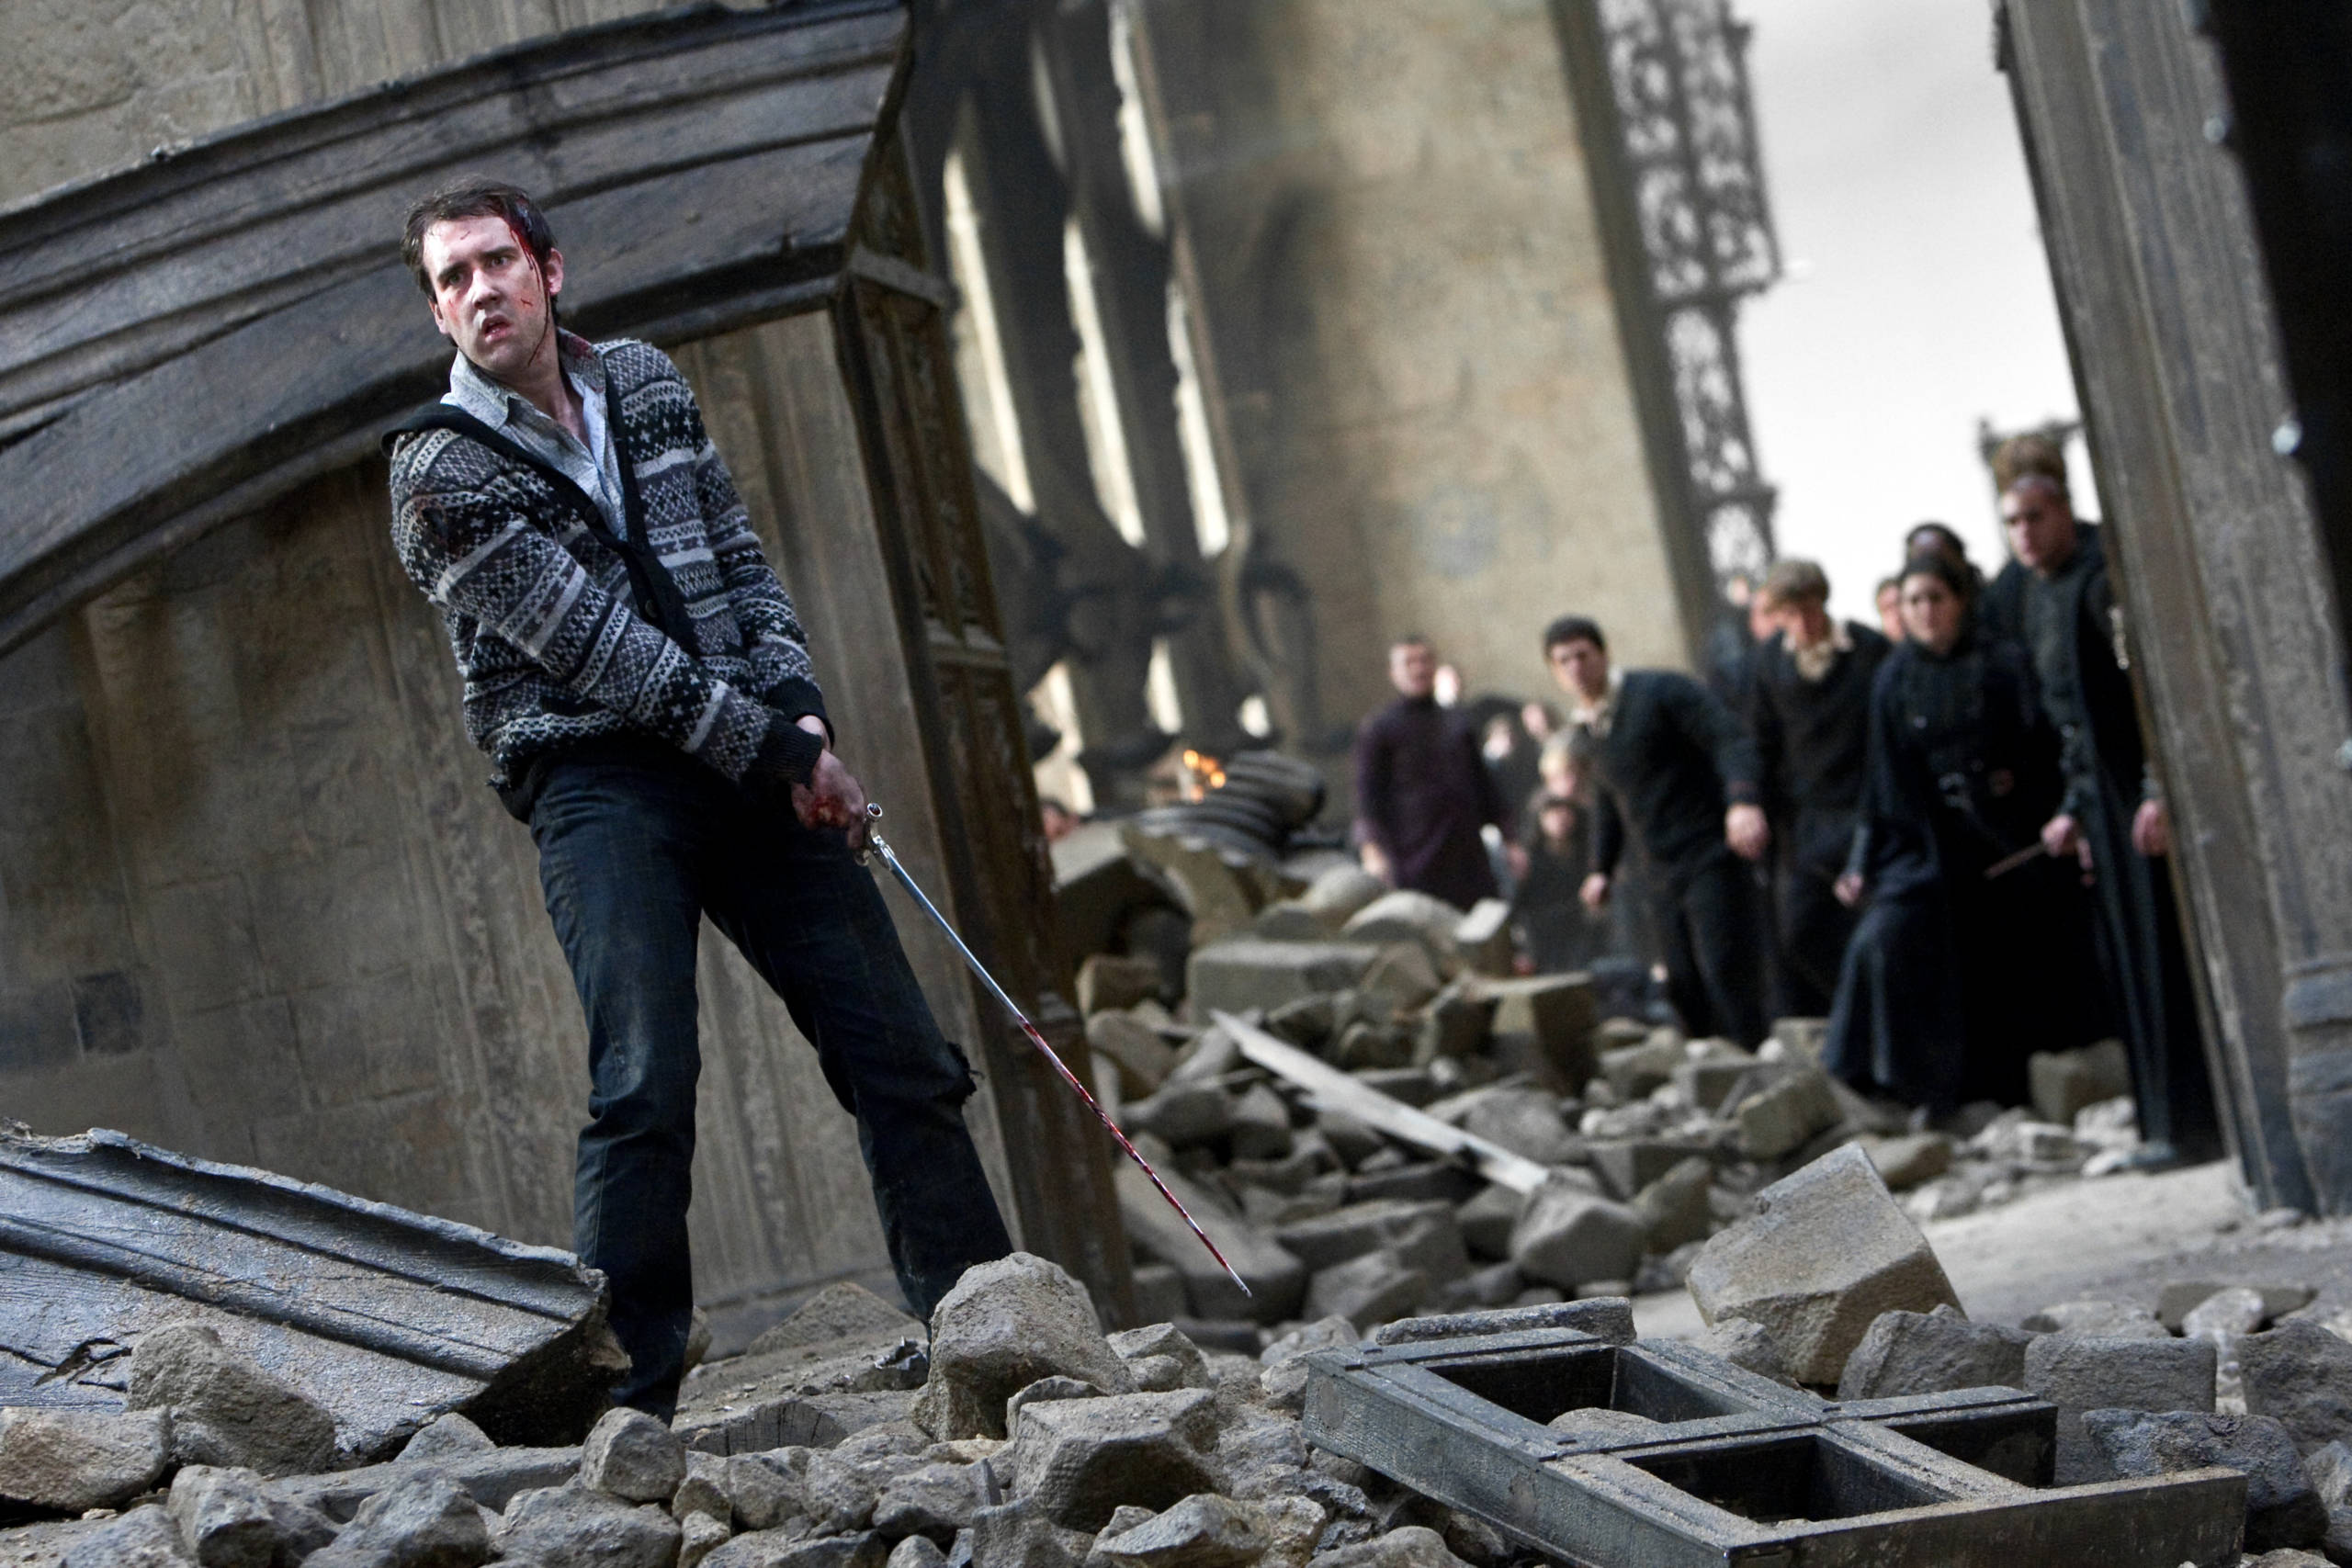 Neville defies Lord Voldemort and holds the sword of Gryffindor in the aftermath of the Battle at Hogwarts.